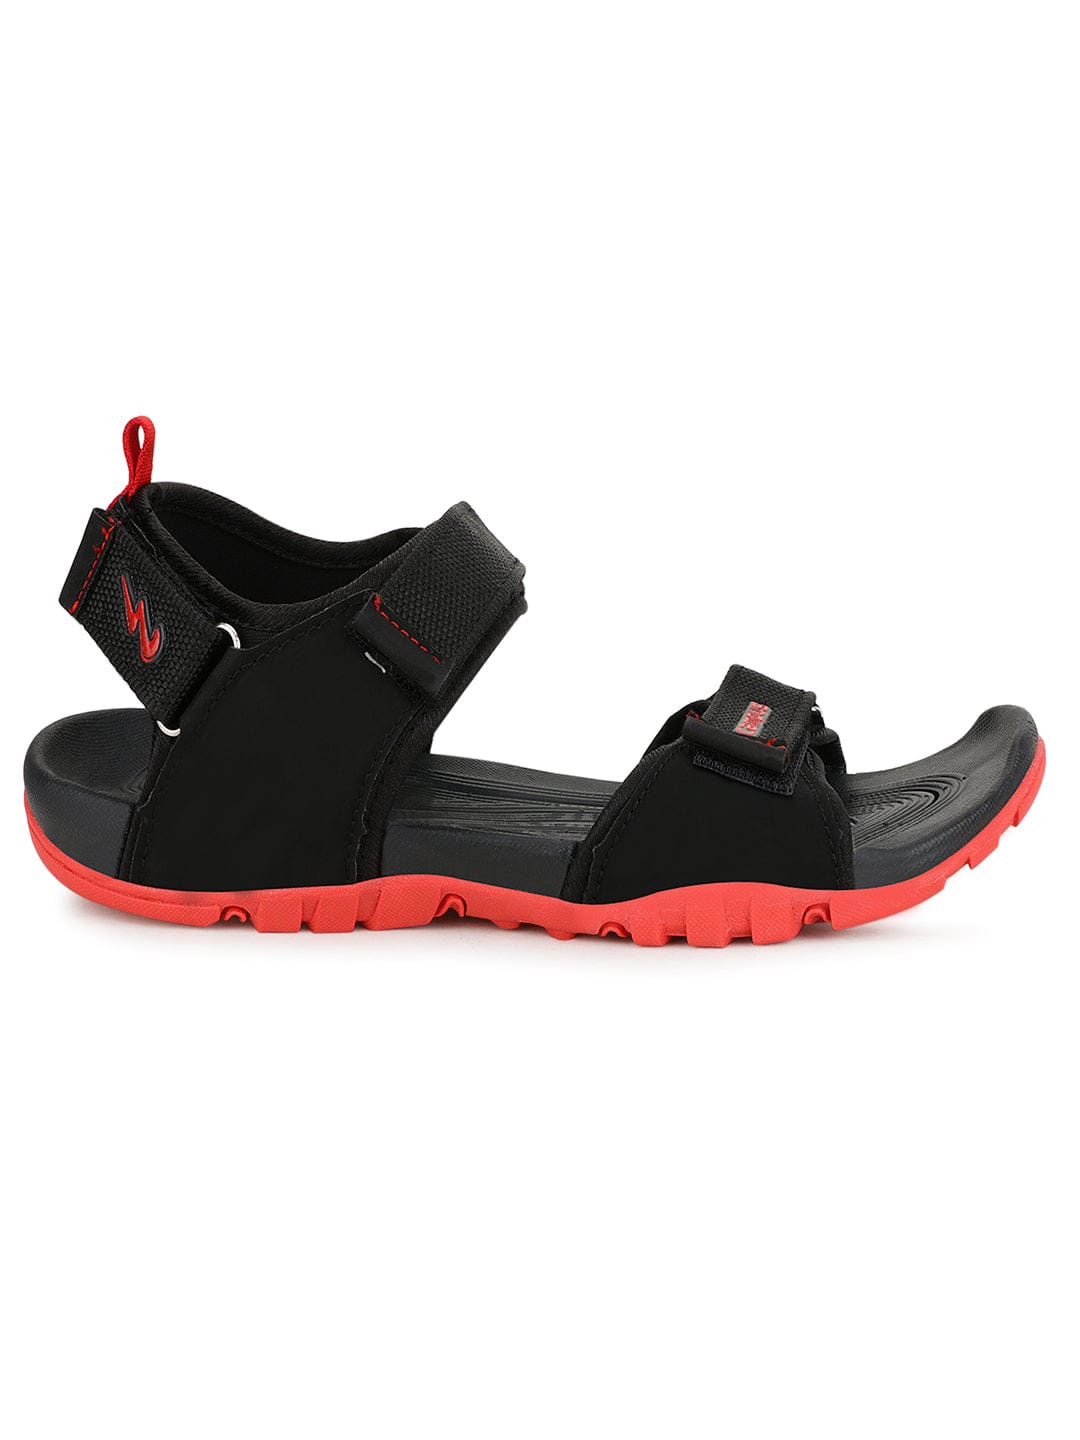 Sparx SS-109 Men Red, Black Sports Sandals - Price History